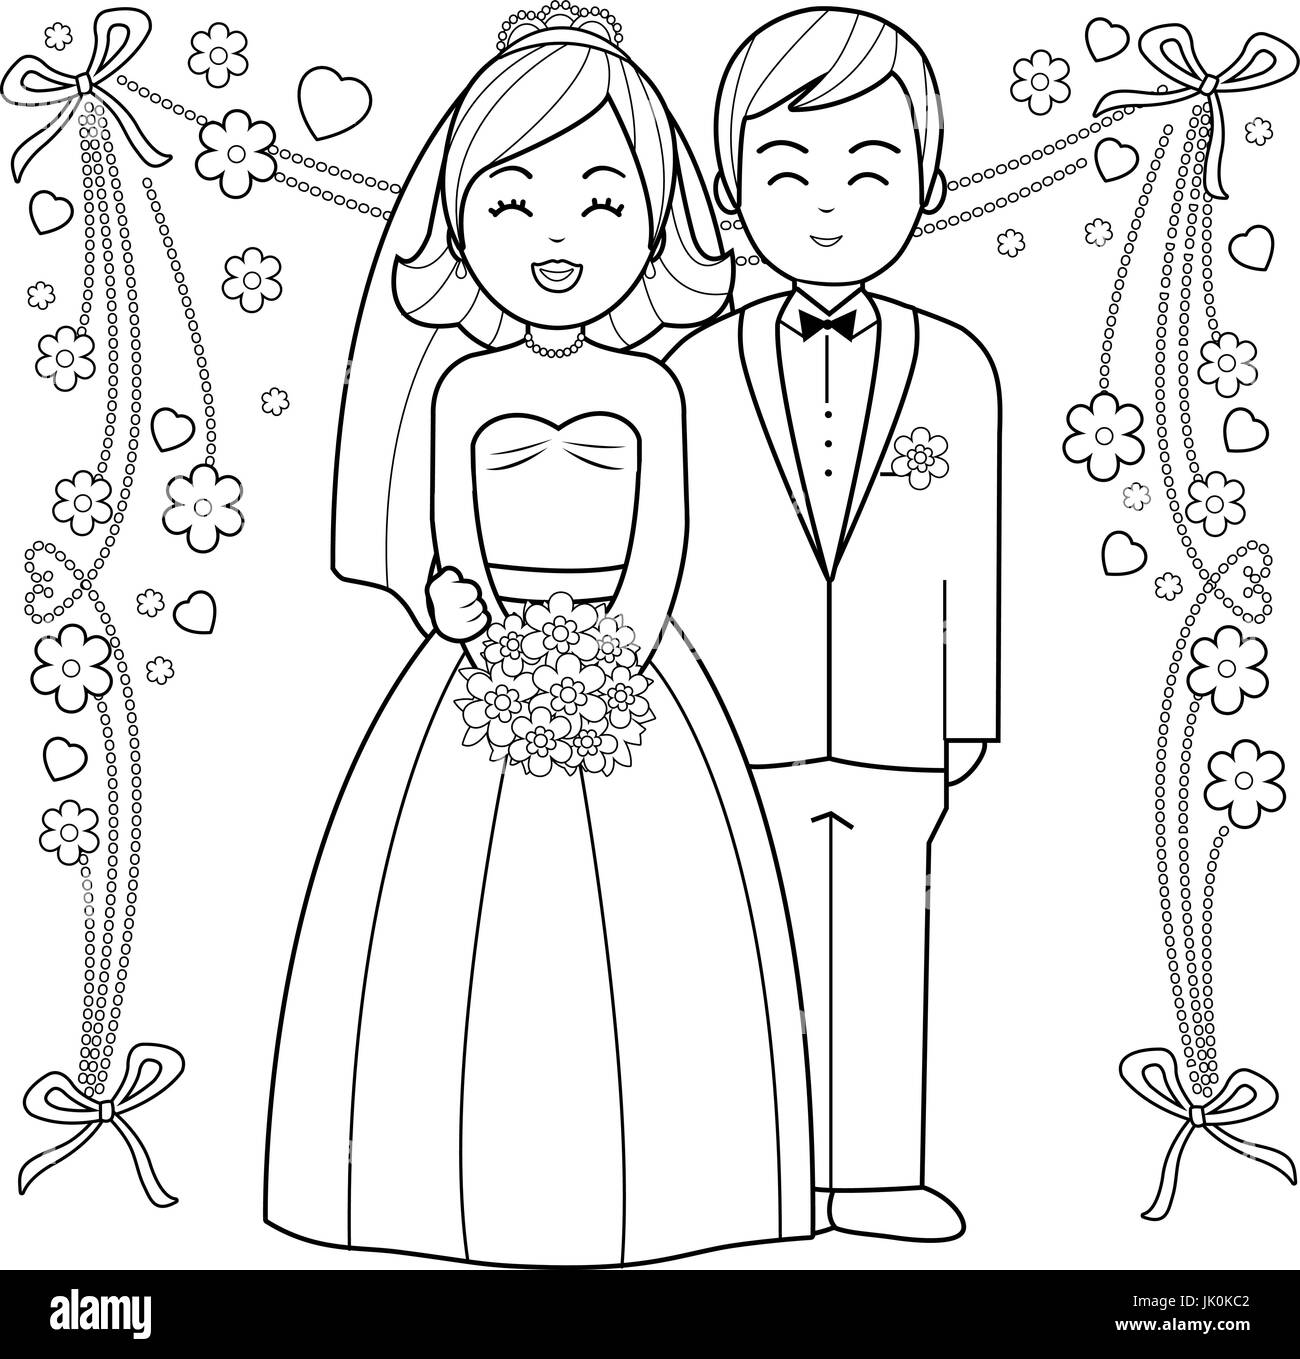 Bride and groom. Black and white coloring book page. Stock Vector